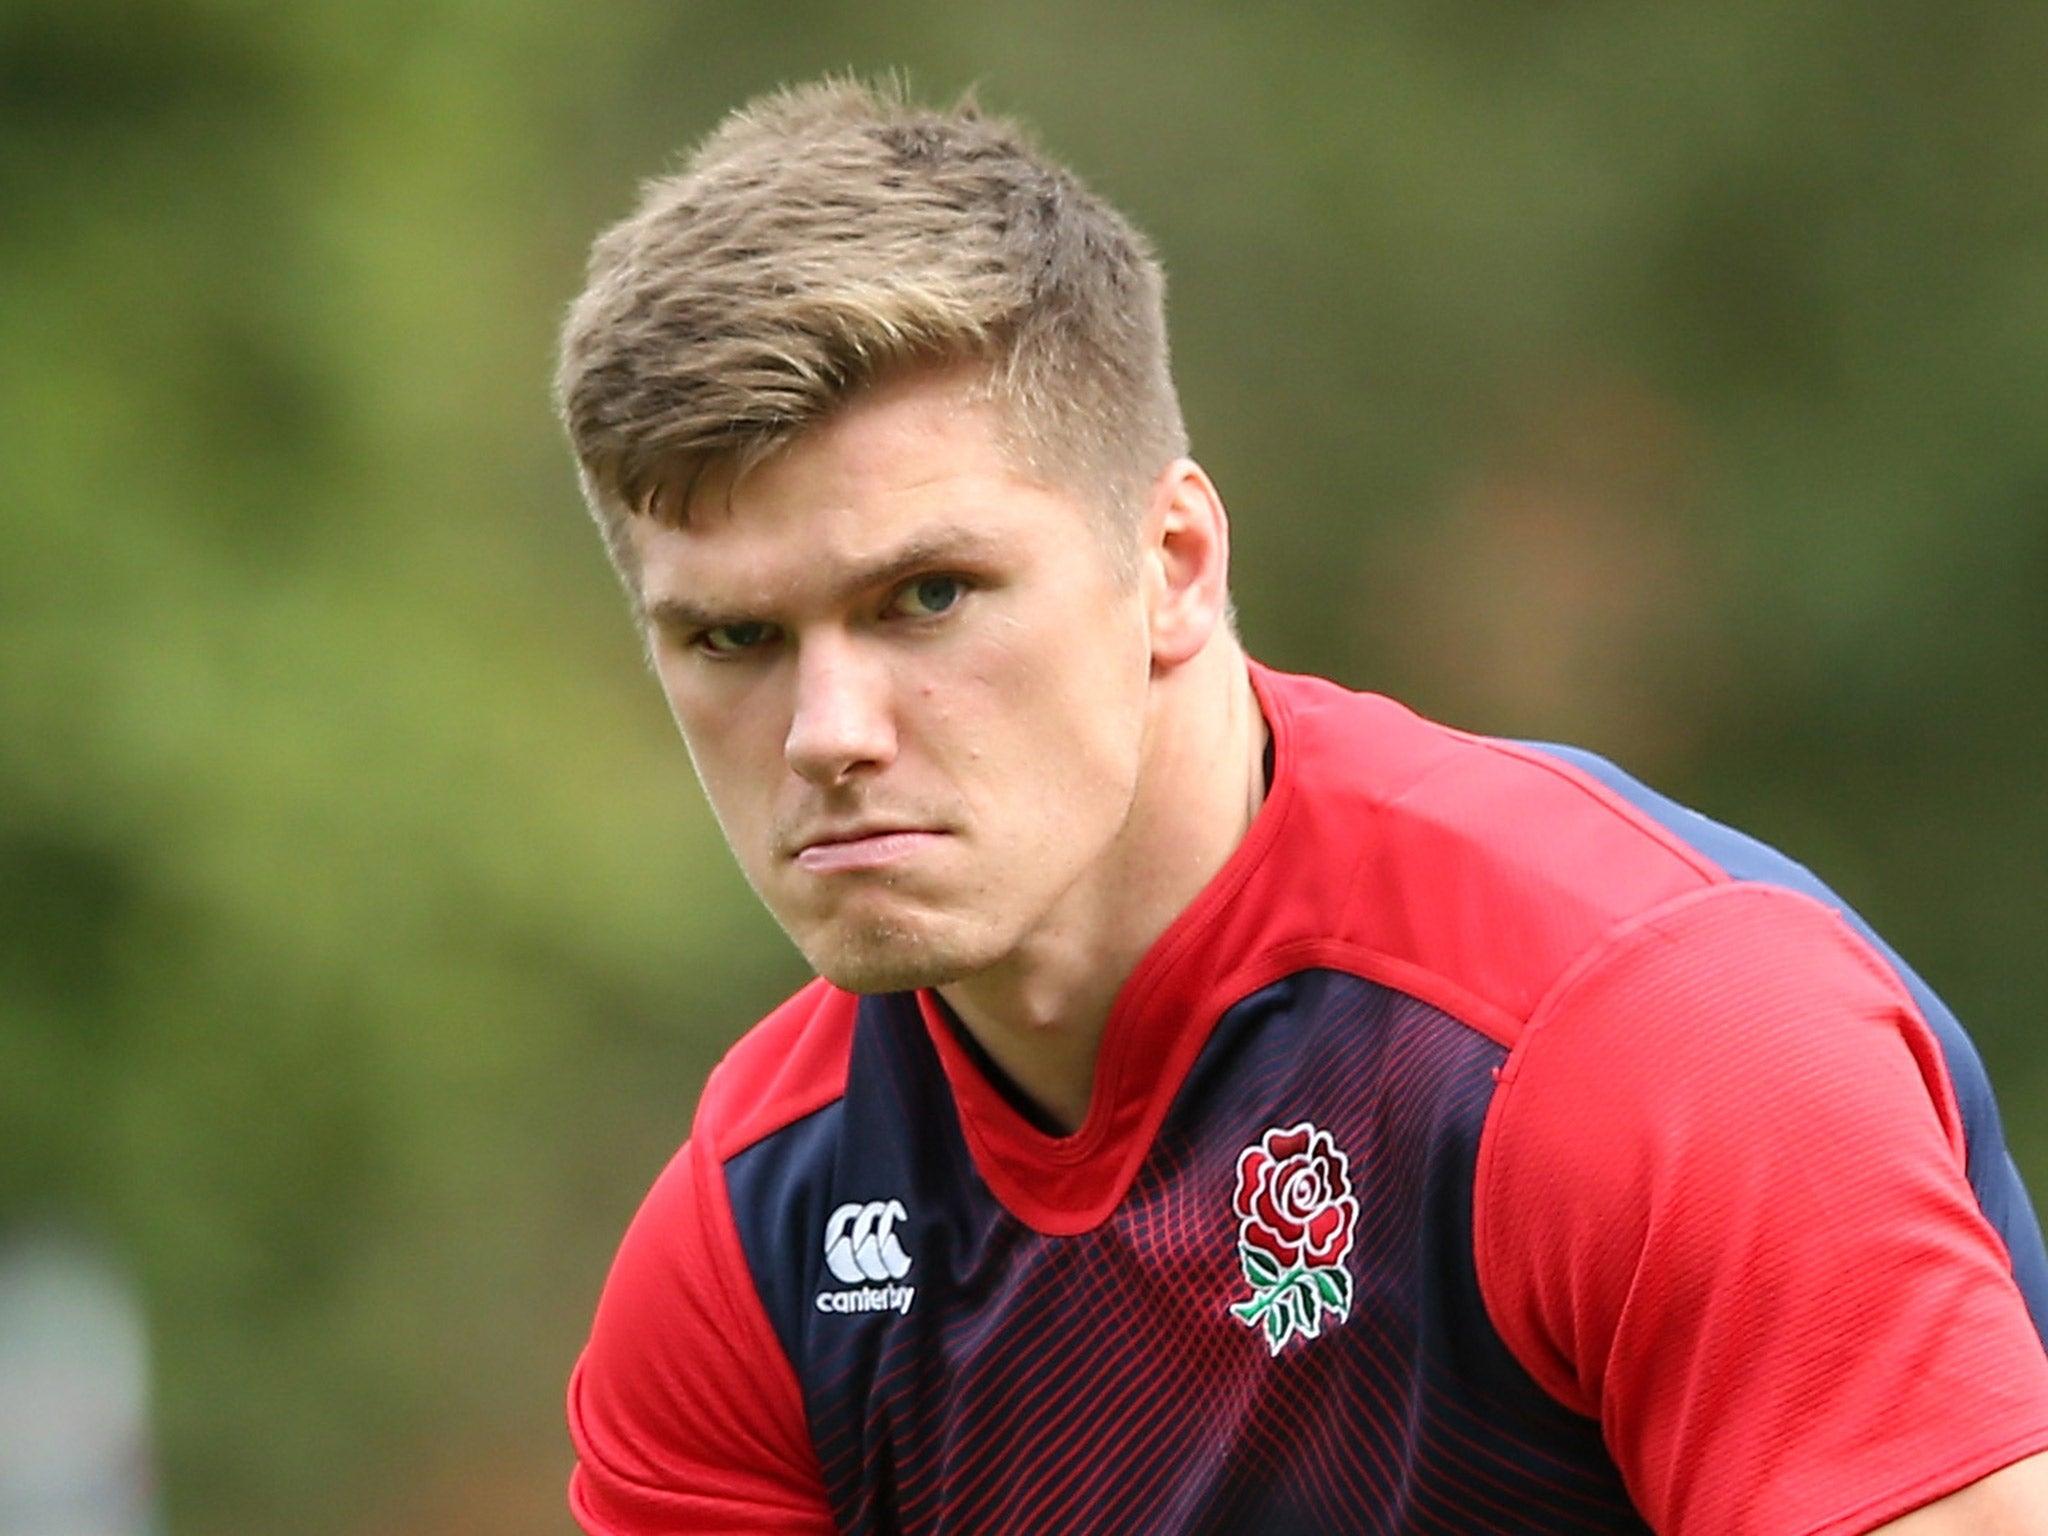 Owen Farrell has been in promising form at fly-half